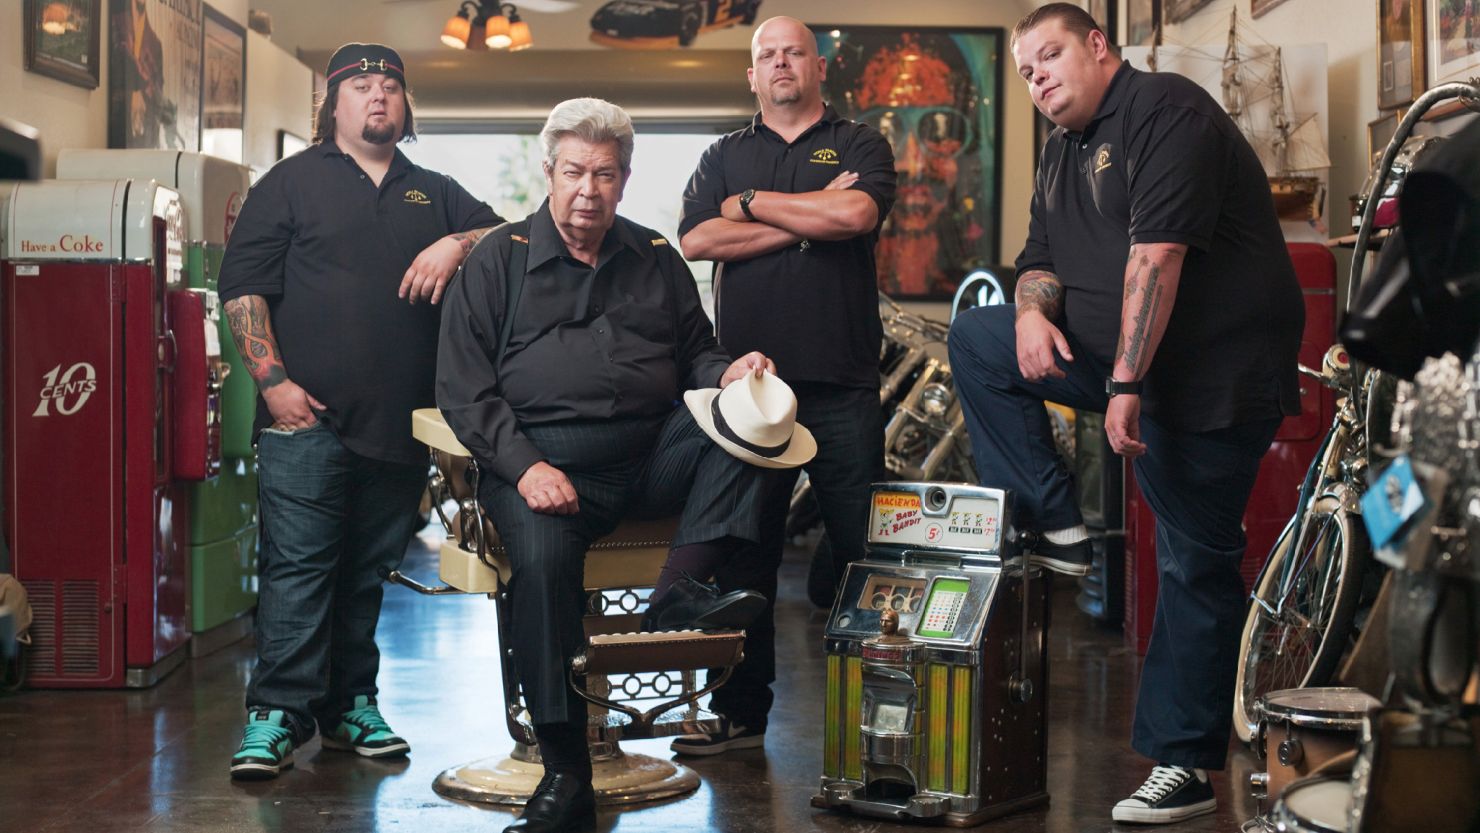 Pawn Stars - History Channel Reality Series - Where To Watch